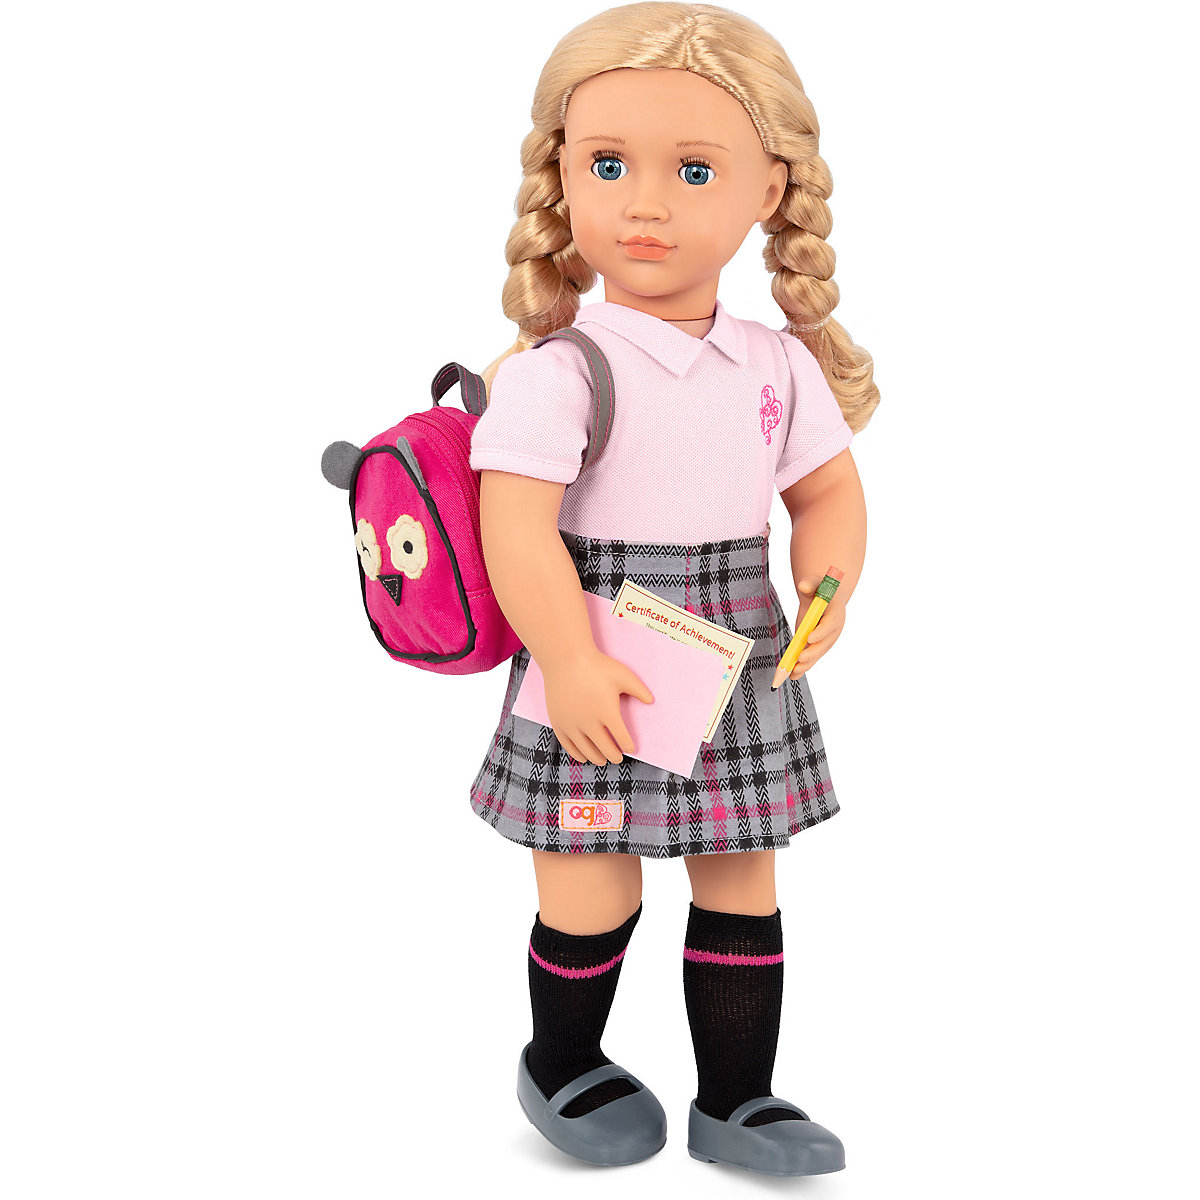 Our Generation Deluxe Puppe Hally 46 cm in Schuluniform